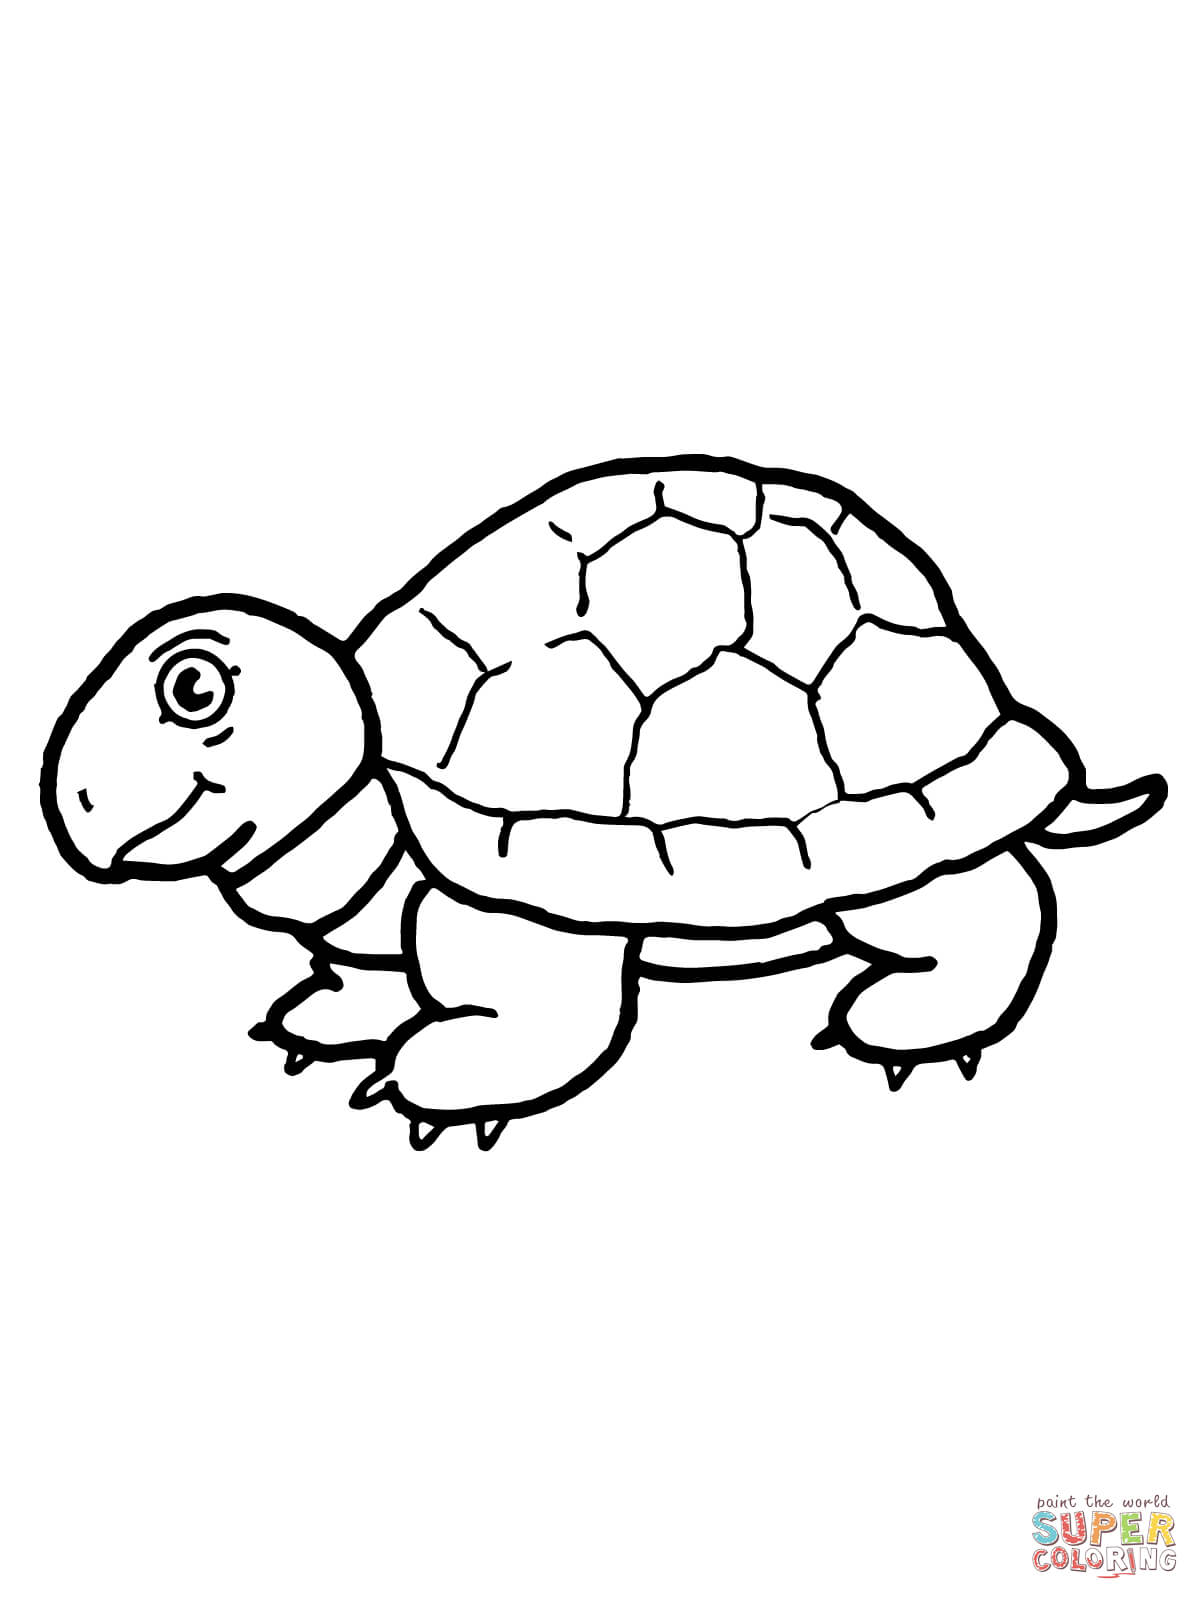 Tortoise coloring pages | Free Coloring Pages